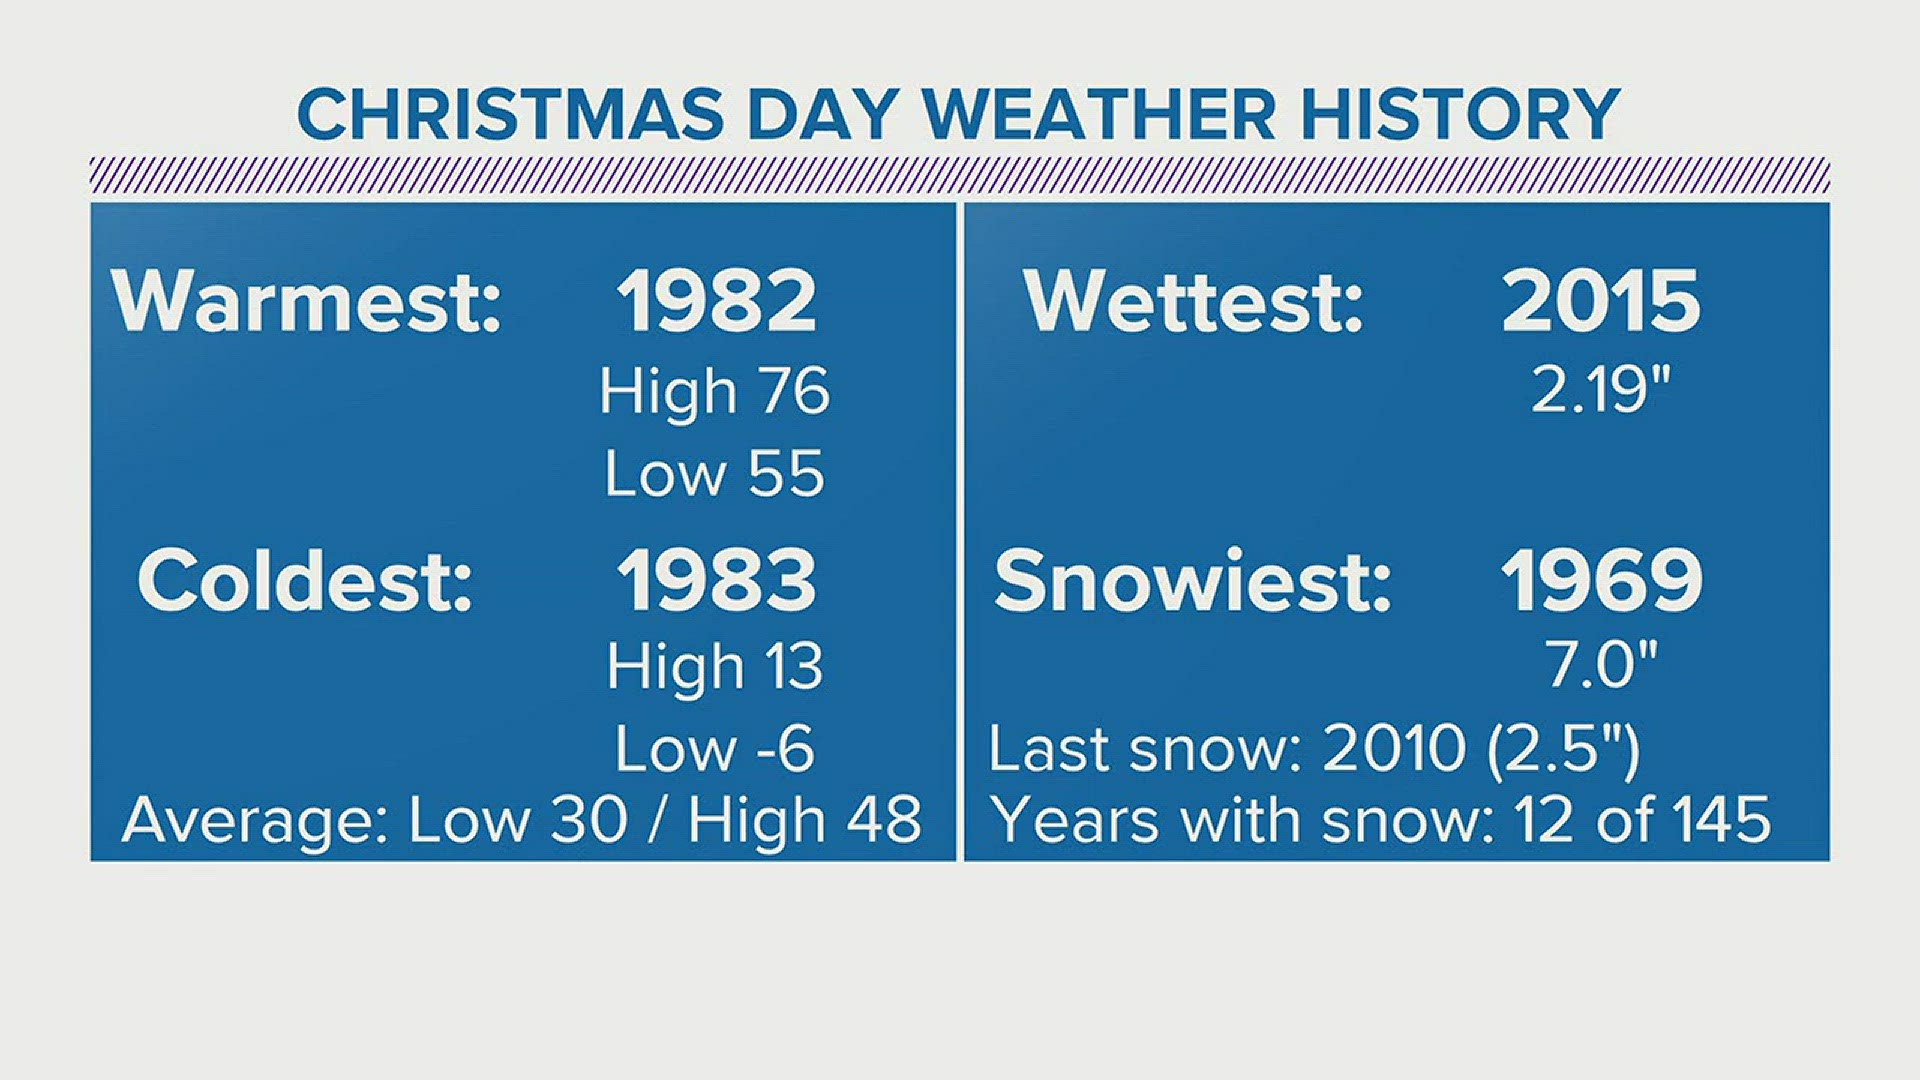 A look at weather extremes on Christmas Day in East Tennessee.